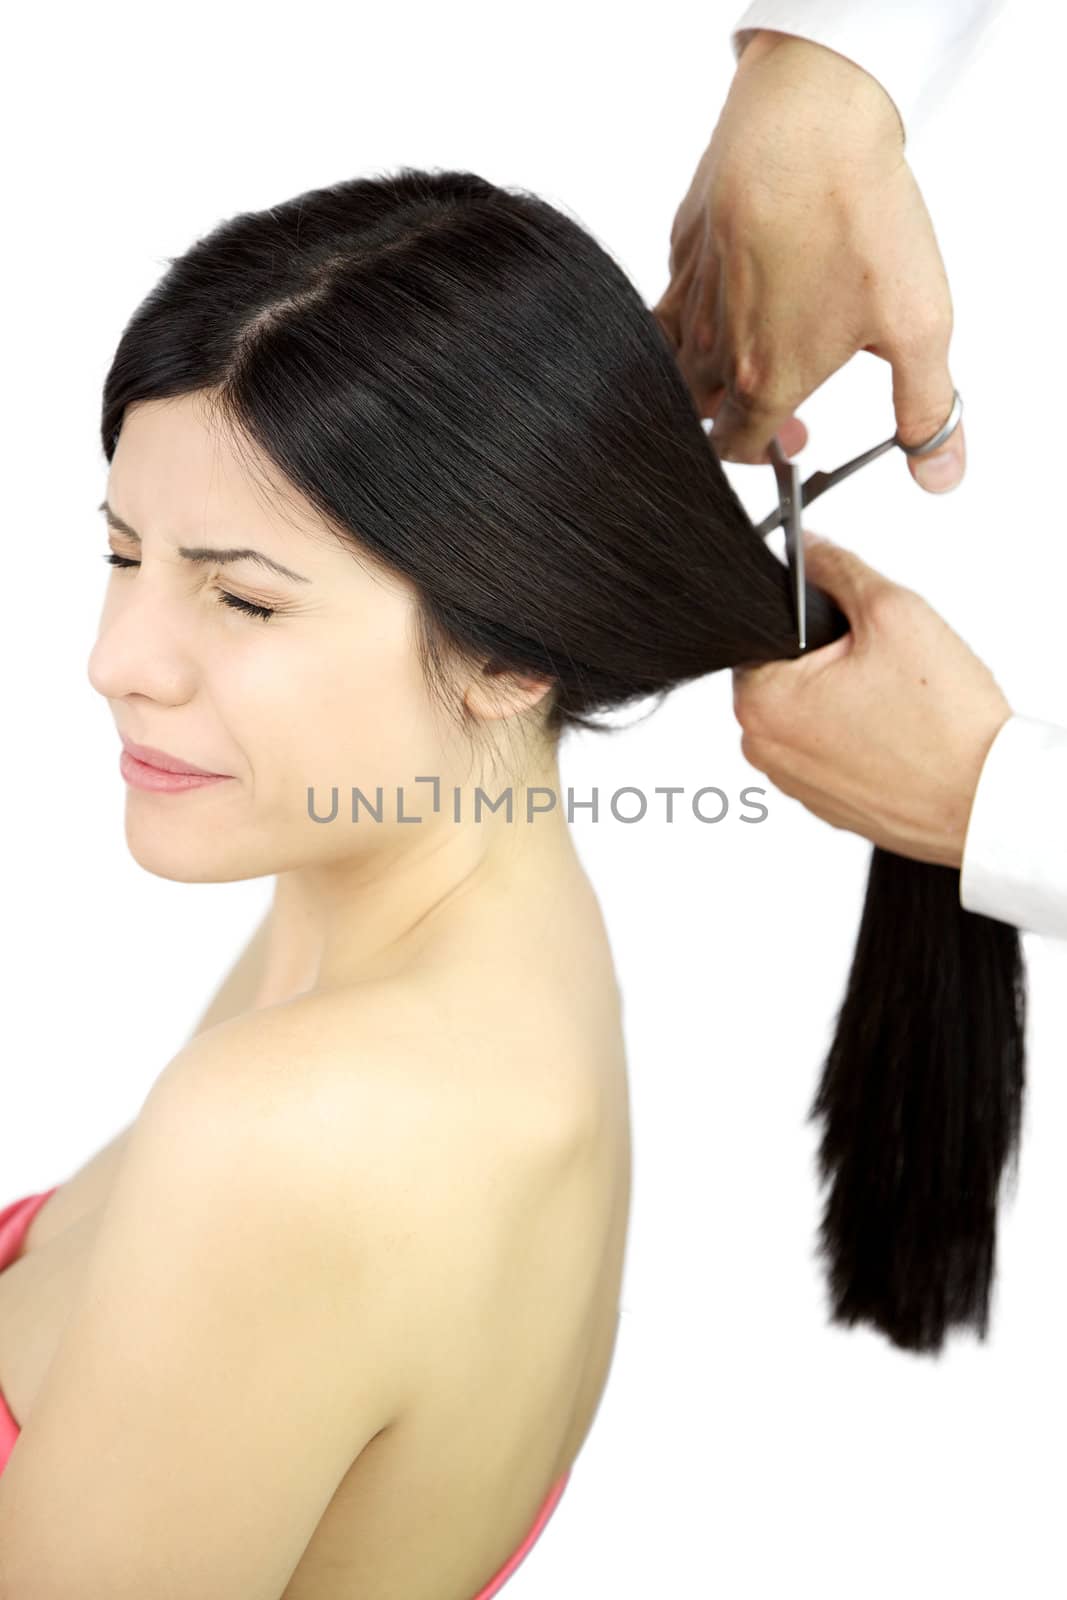 Very scared female model because of big haircut